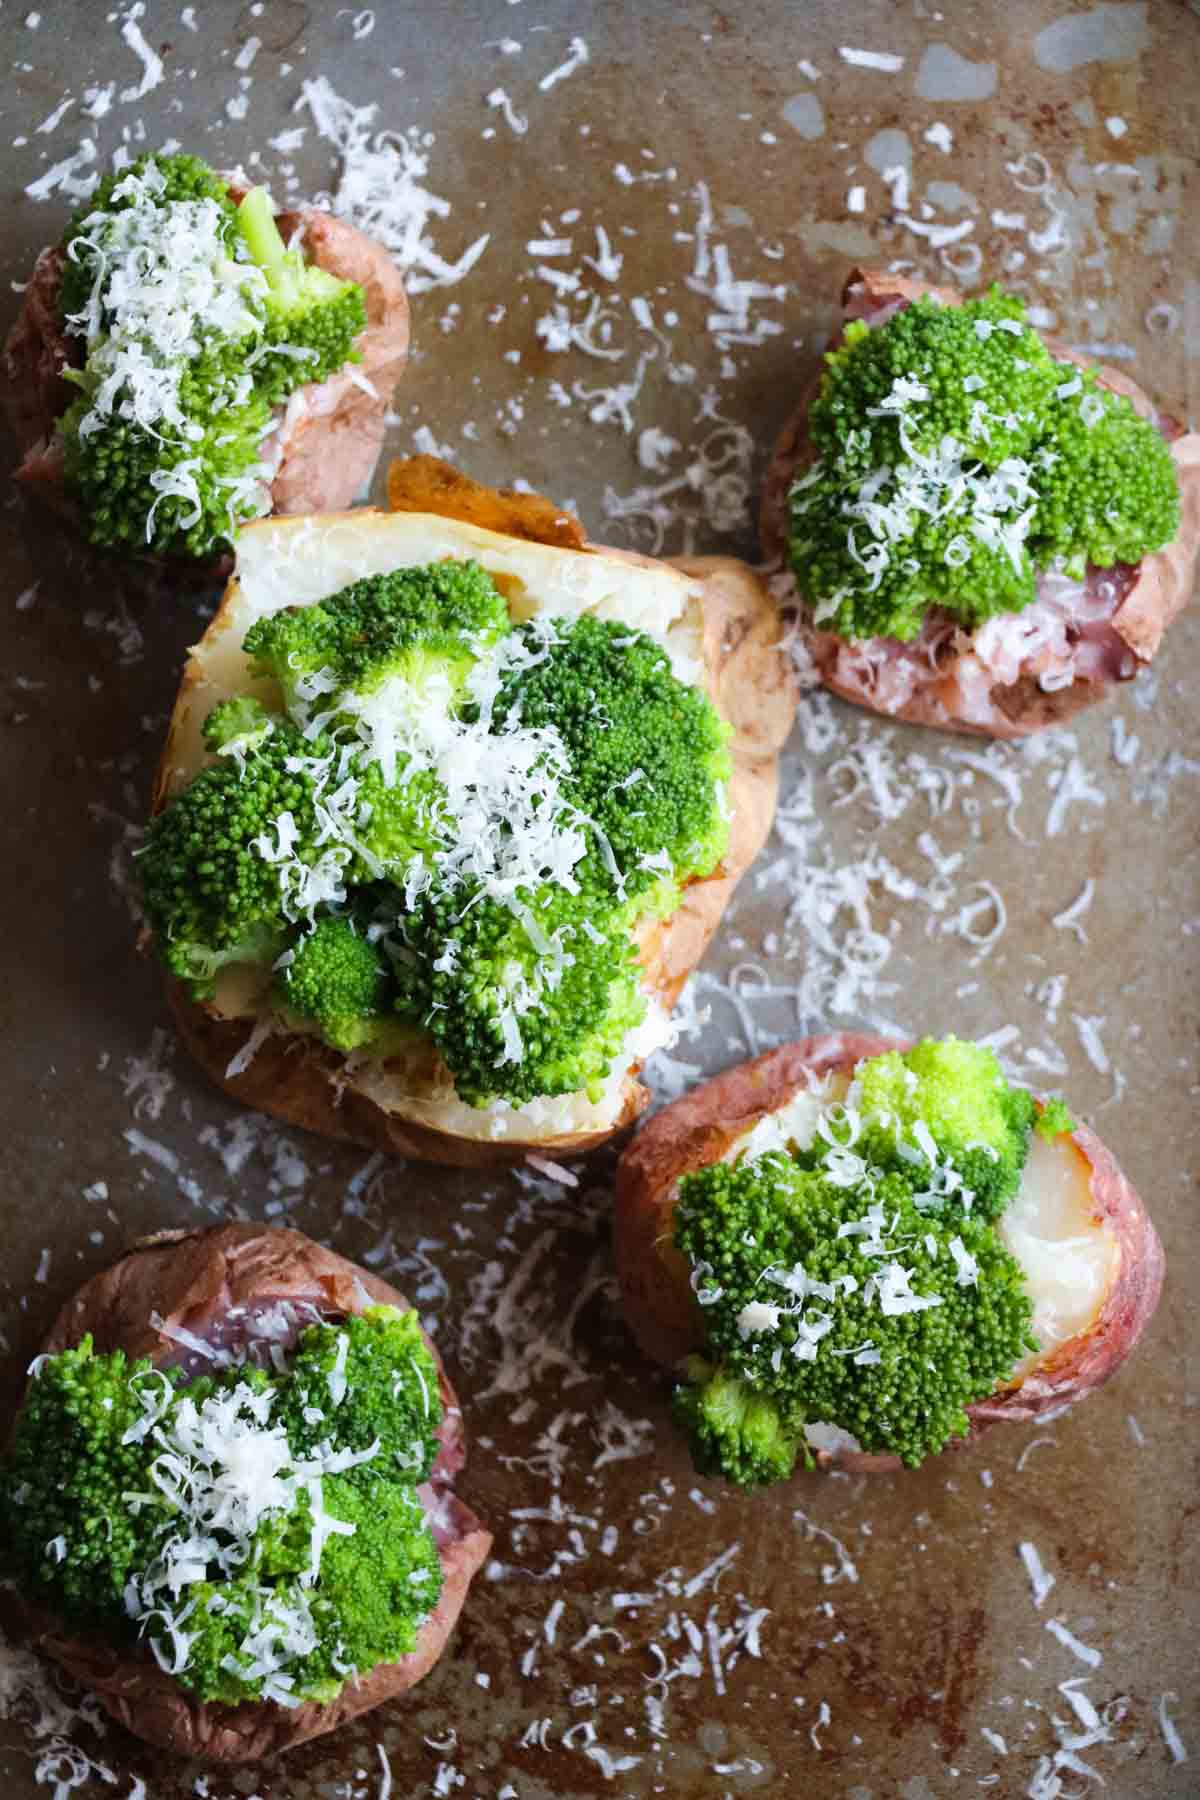 Parmesan Broccoli Loaded Baked Potato. A quick and healthy recipe using only 3 ingredients, broccoli, potato, and parmesan cheese. You can eat it as a side dish or the main event. I LOVE this recipe and have it at least once per week! Gluten free, quick and healthy | abraskitchen.com